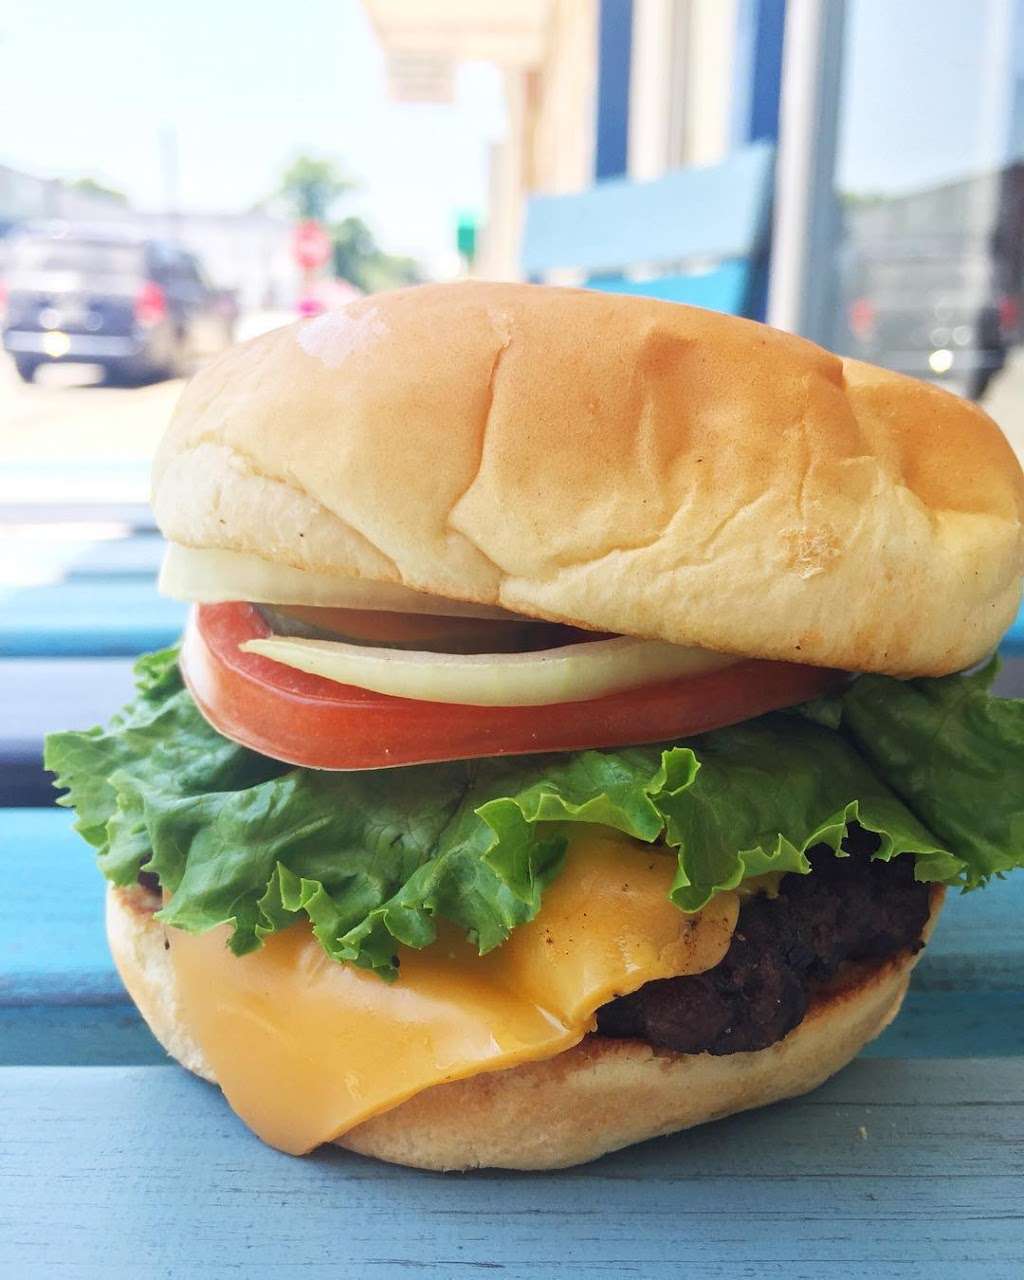 Clydes Burger Cafe | 106 E Montgomery St, Francesville, IN 47946 | Phone: (219) 204-8020